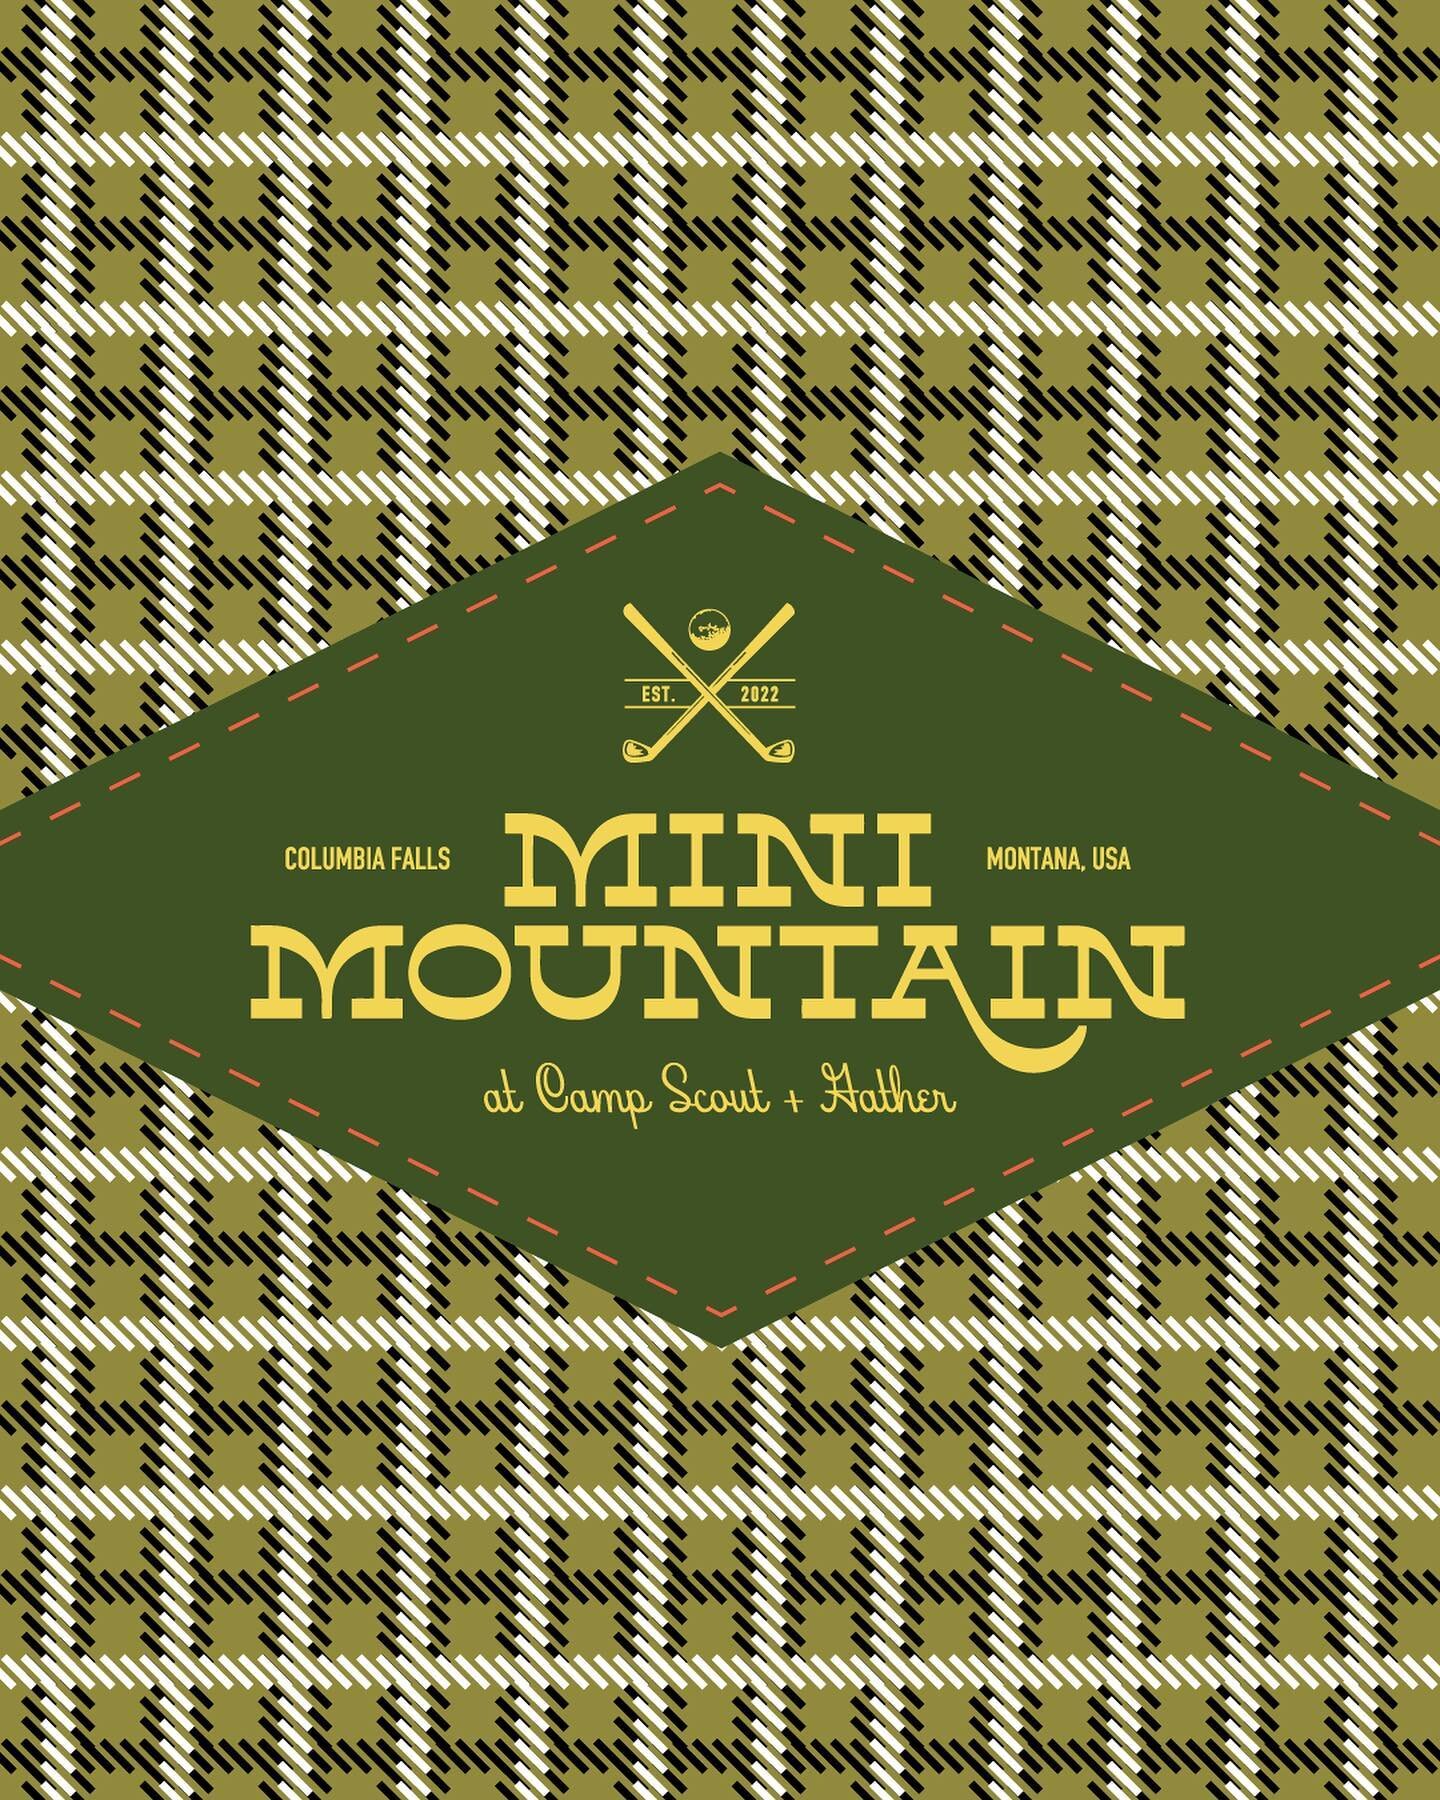 Hitting ya with a little 2-in-1: Mini Mountain Golf is the sub-brand under Camp Scout + Gather! ⛳️

Just to give you a quick refresher&mdash; Camp S+G is a large campus in Columbia Falls, MT, that features mini golf, a mercantile, food + drink, event